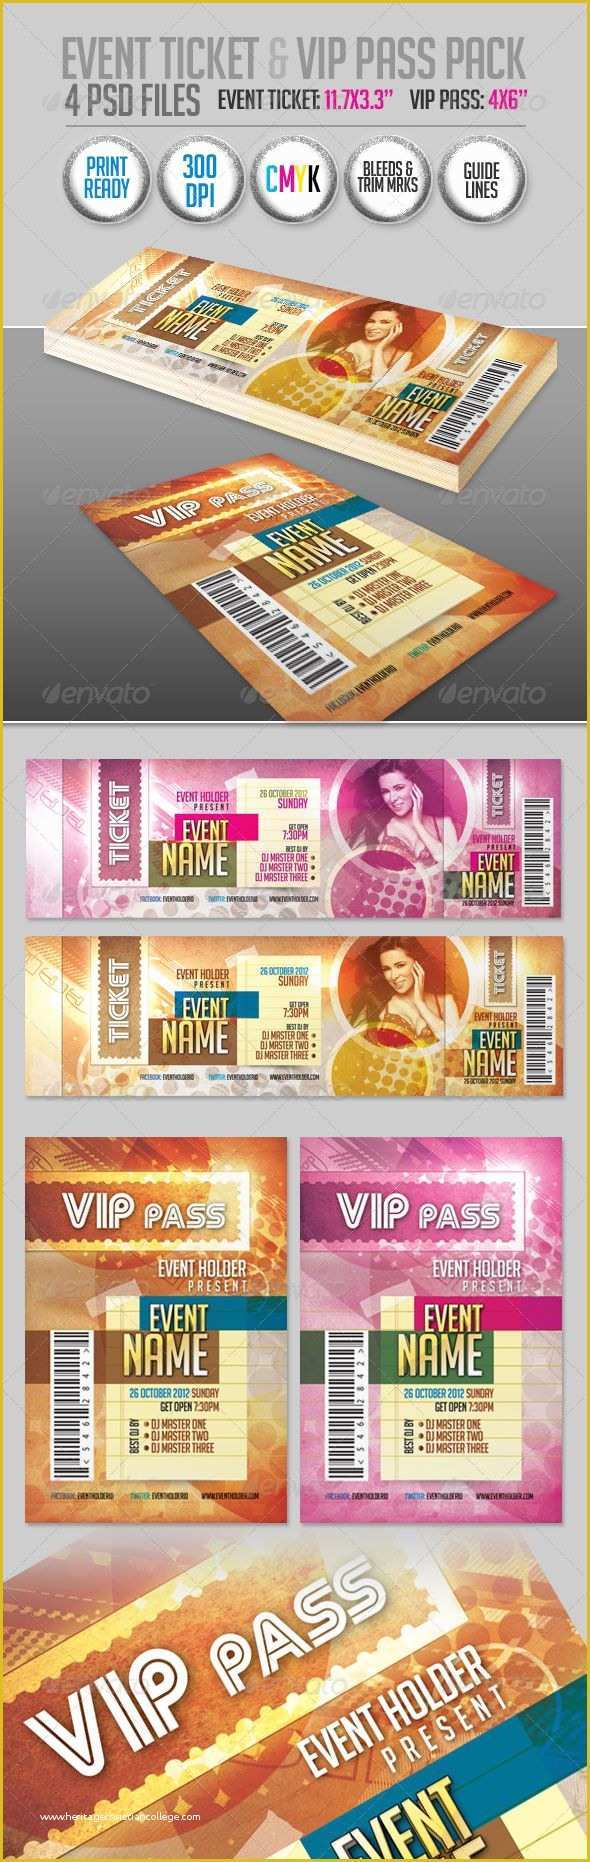 Event Ticket Template Psd Free Download Of event Ticket & Vip Pass Pack